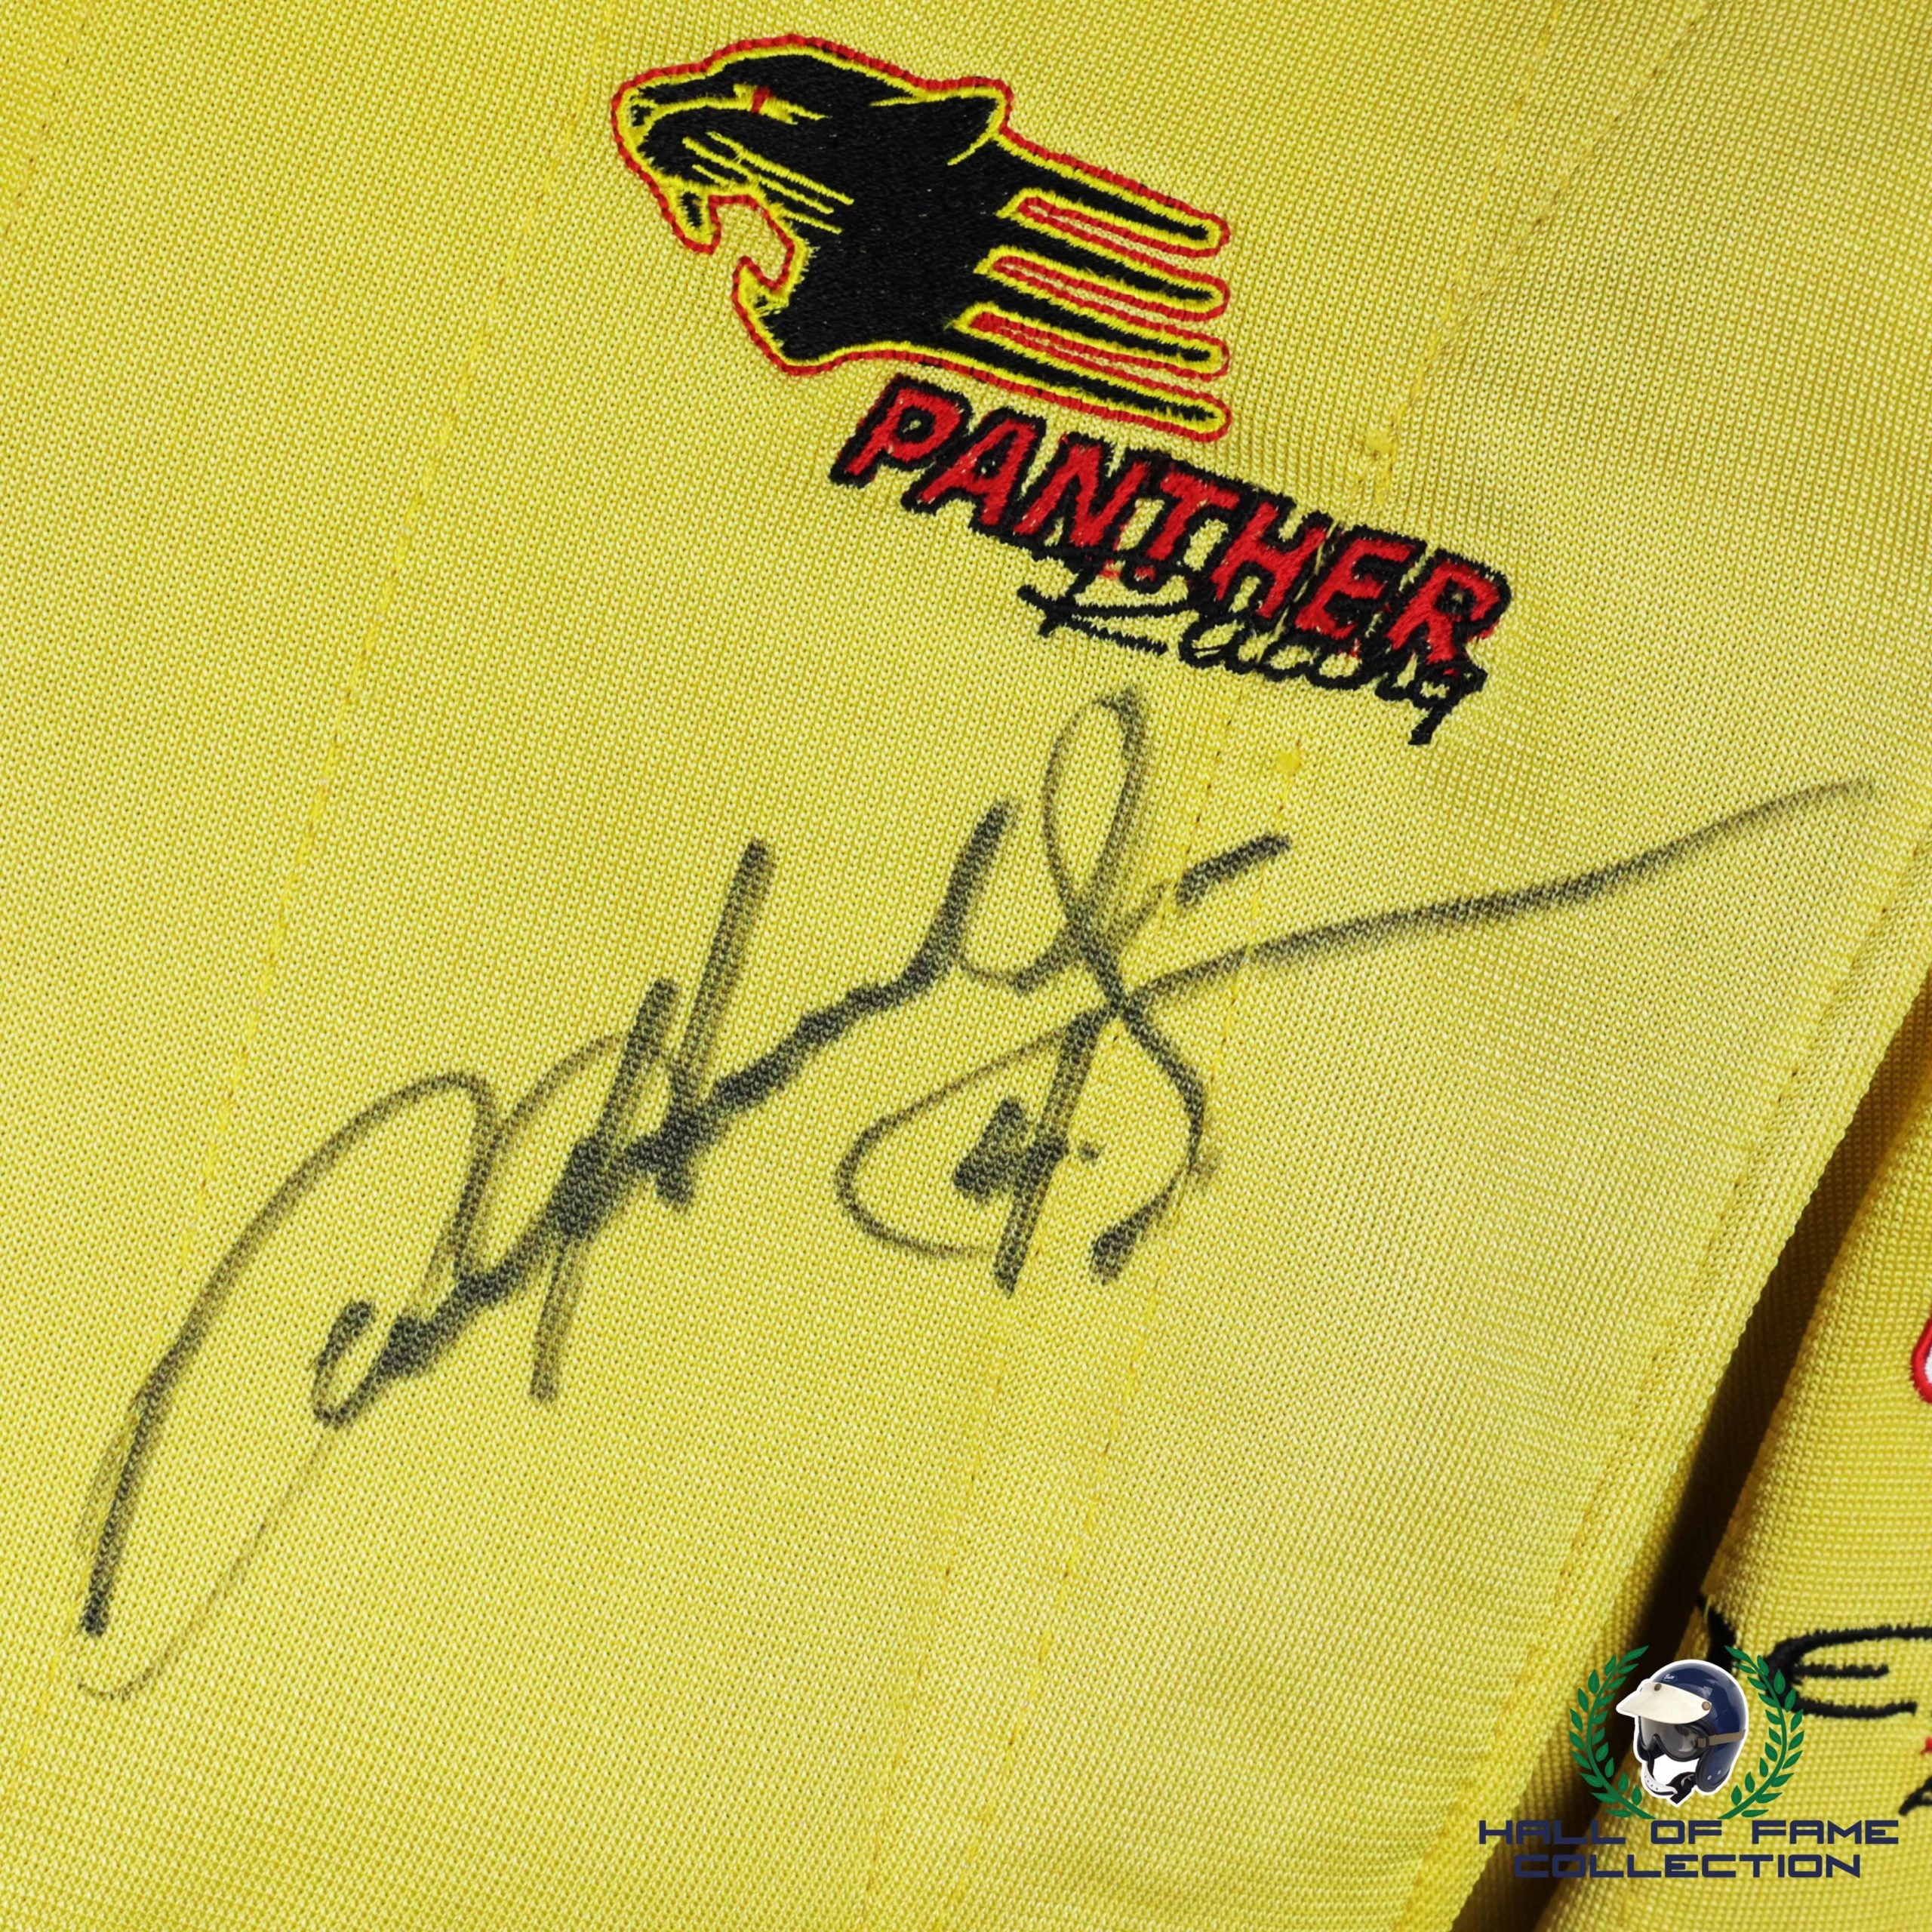 2002 Sam Hornish Jr. Signed Championship Used Panther Racing Simpson IndyCar Suit